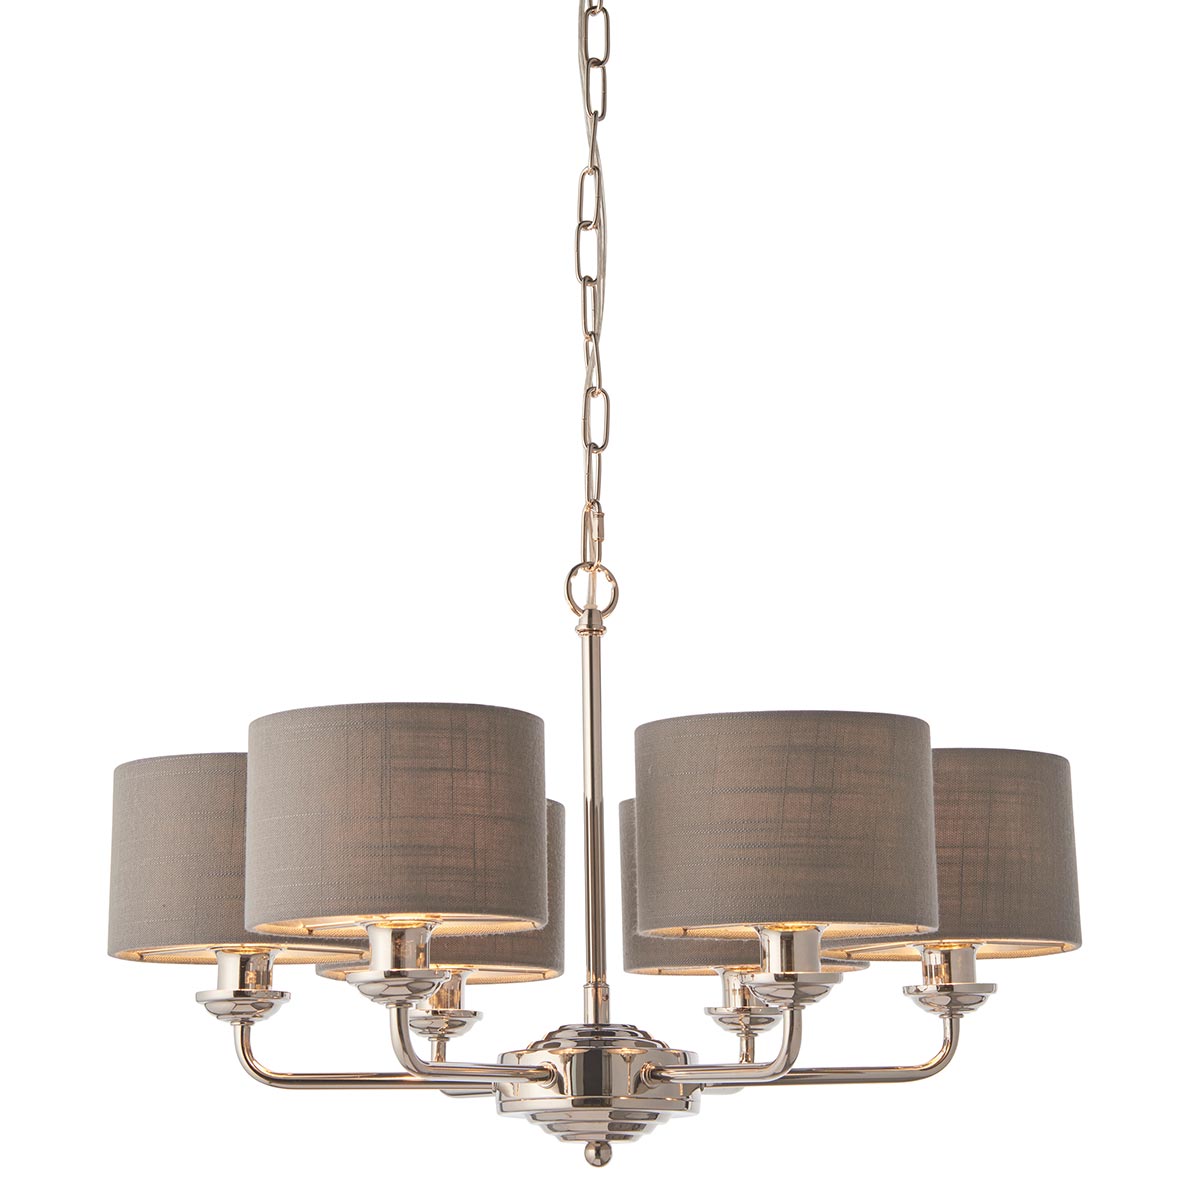 Highclere 6 Light Polished Nickel Chandelier Charcoal Shades